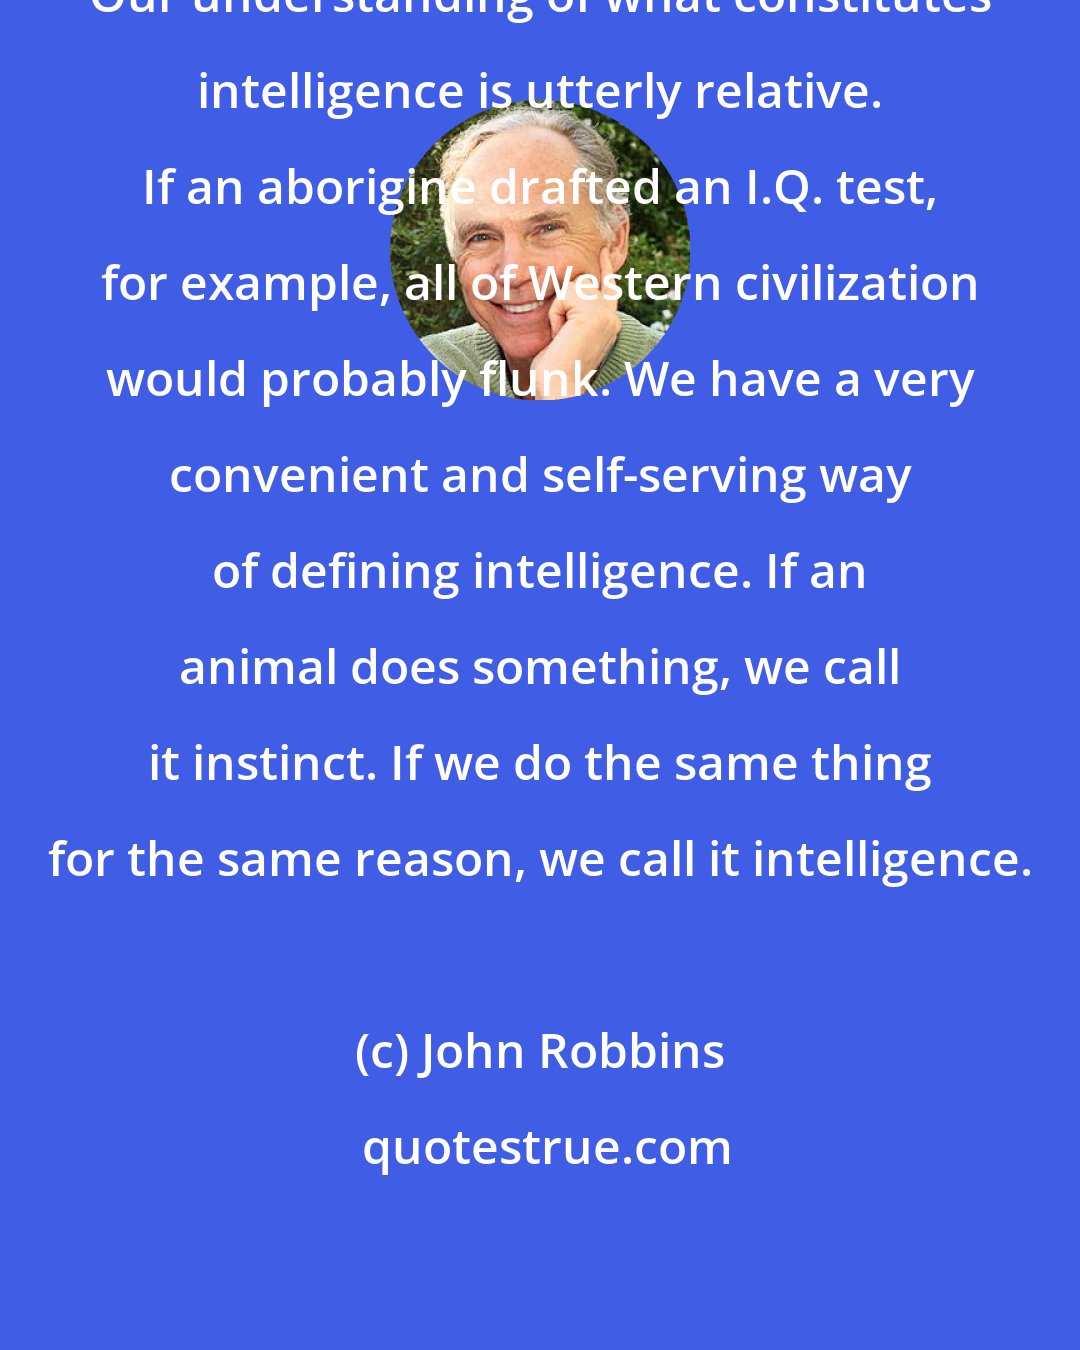 John Robbins: Our understanding of what constitutes intelligence is utterly relative. If an aborigine drafted an I.Q. test, for example, all of Western civilization would probably flunk. We have a very convenient and self-serving way of defining intelligence. If an animal does something, we call it instinct. If we do the same thing for the same reason, we call it intelligence.